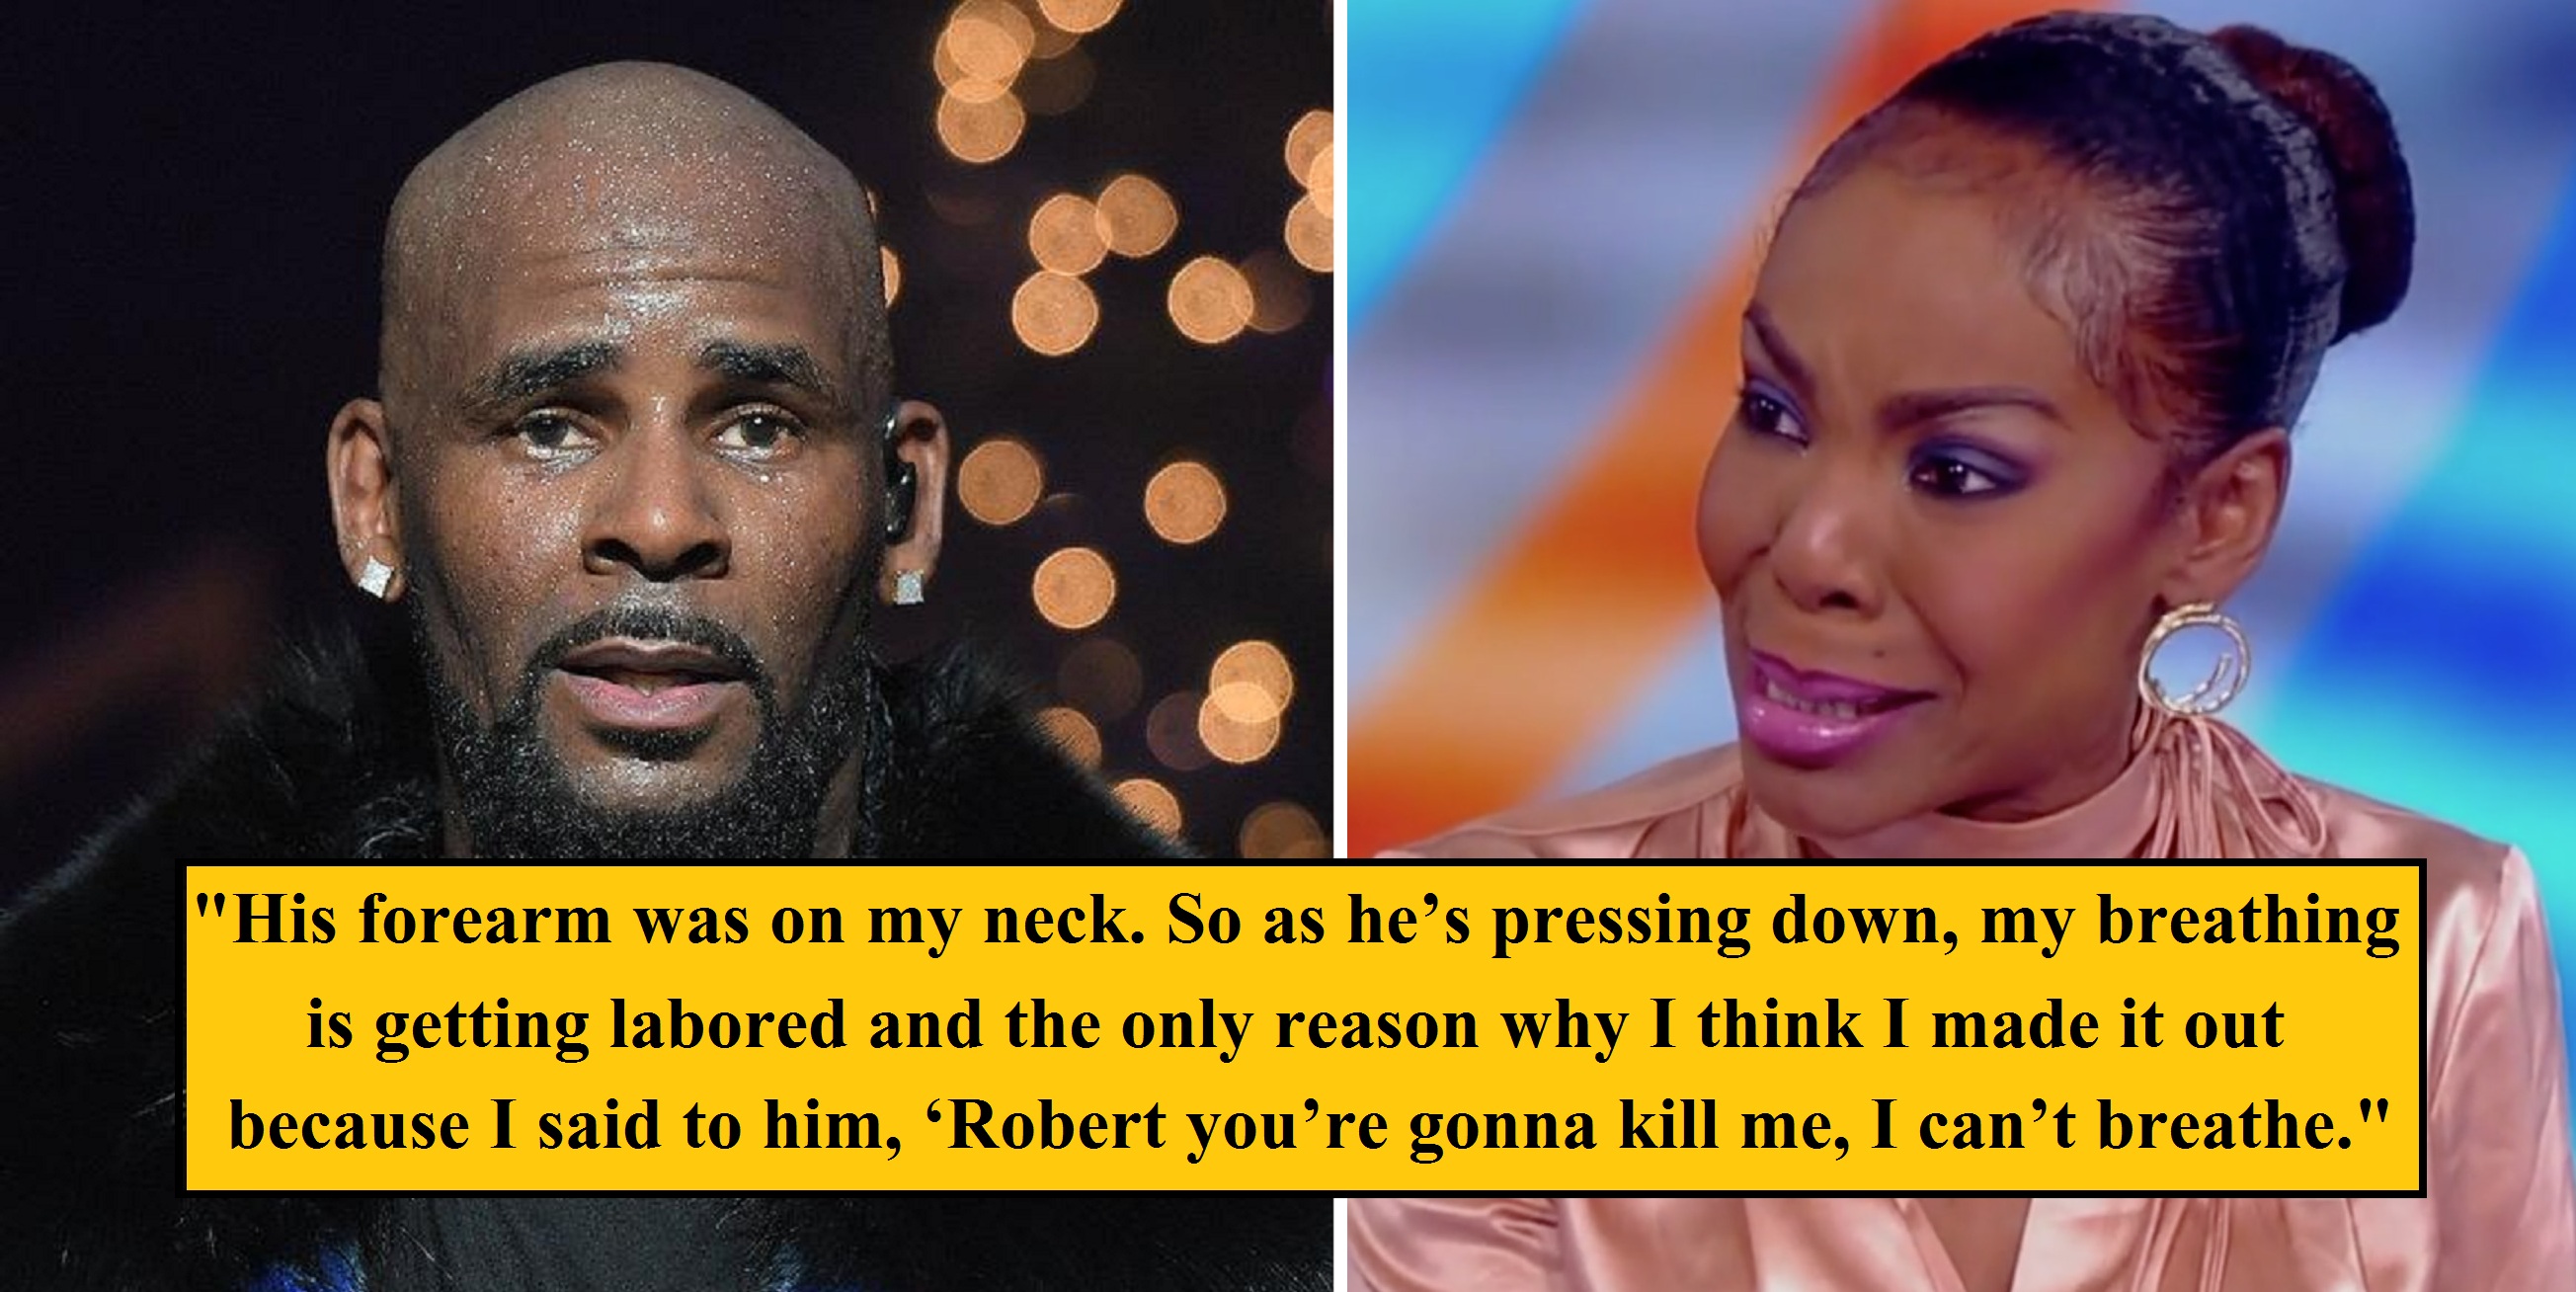 R. Kelly’s Ex-Wife Opens Up About Abuse and Attempting Suicide